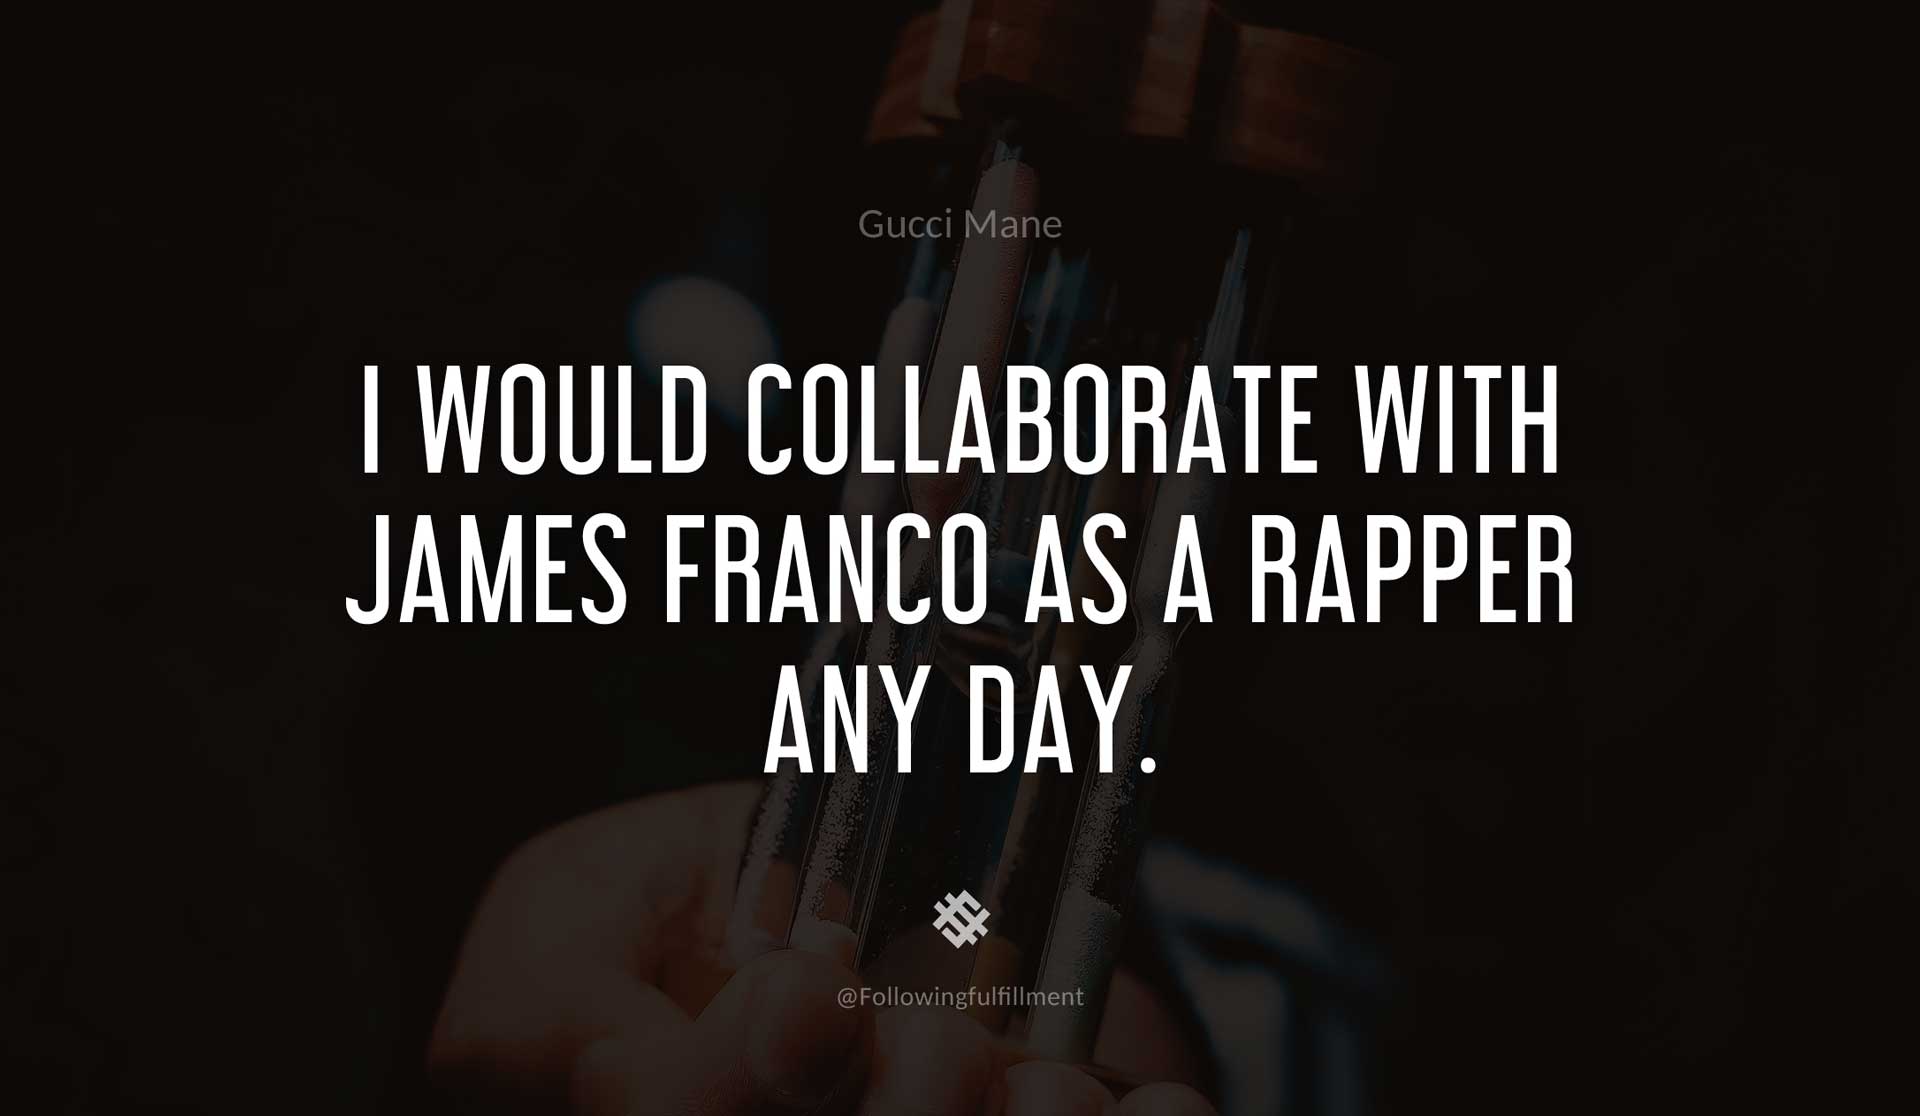 I-would-collaborate-with-James-Franco-as-a-rapper-any-day.-GUCCI-MANE-Quote.jpg